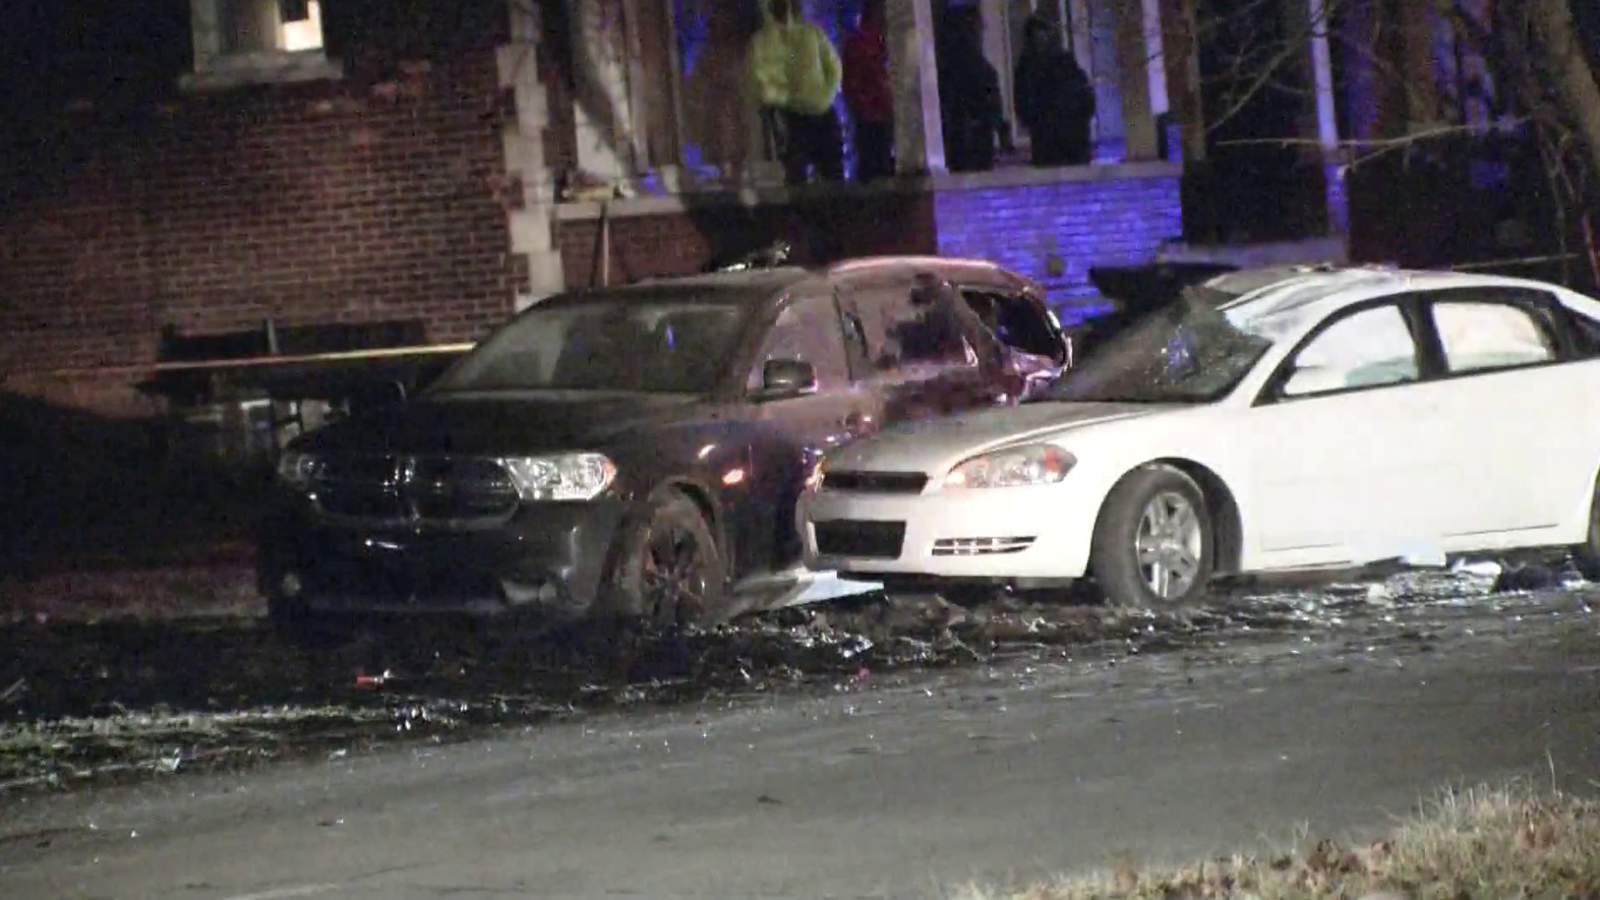 Woman killed when driver loses control, crashes into parked car on Detroit’s west side